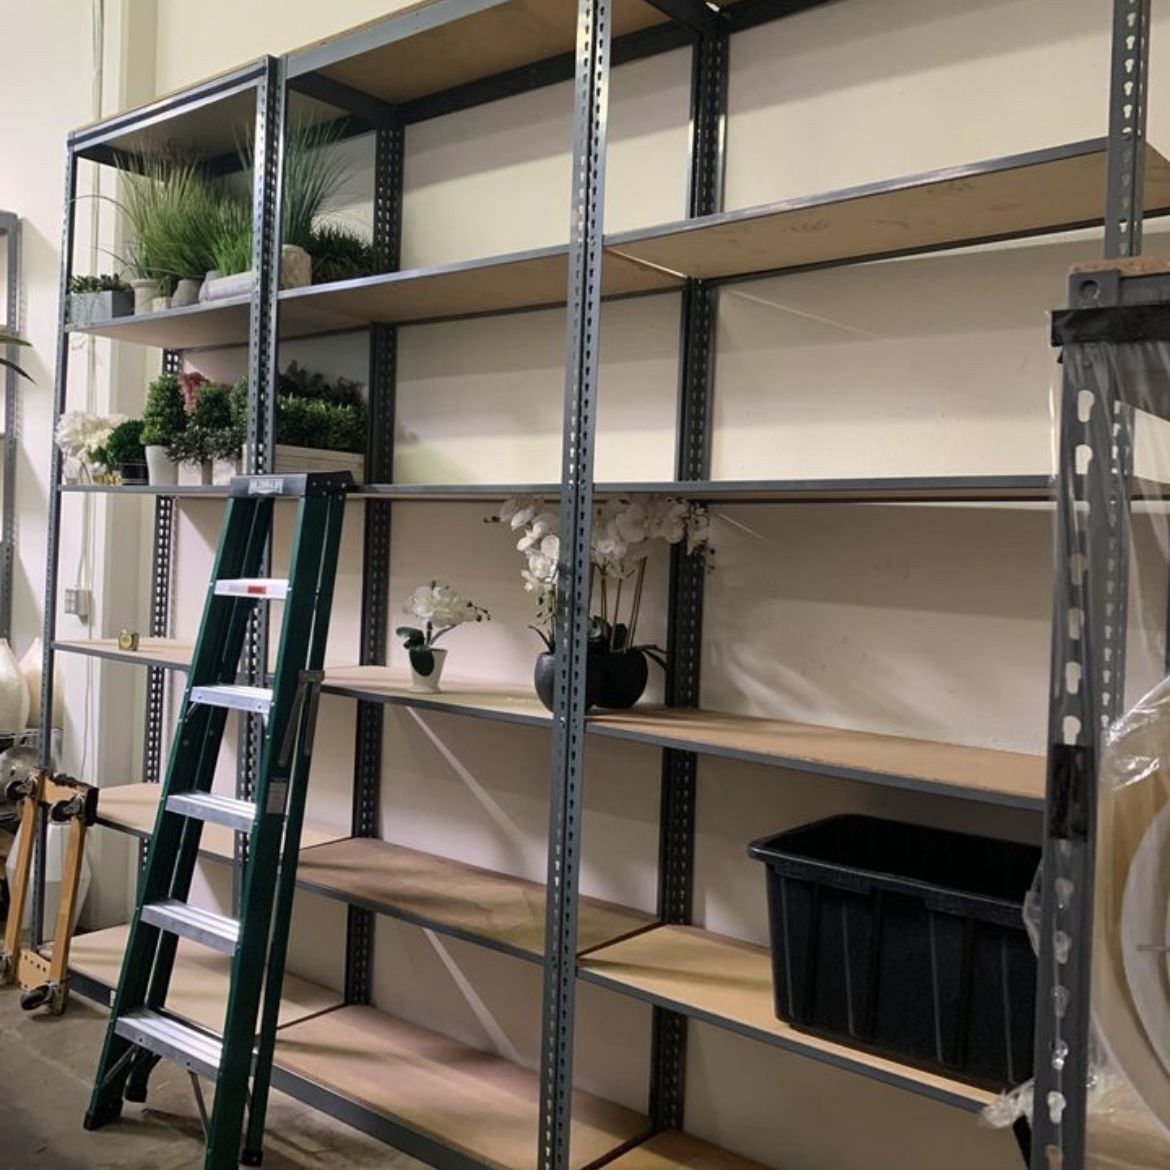 Garage Shelving 48 In W X 18 In D Rigid Shed Organization Racks Stronger Than Homedepot Lowes Costco Delivery Available